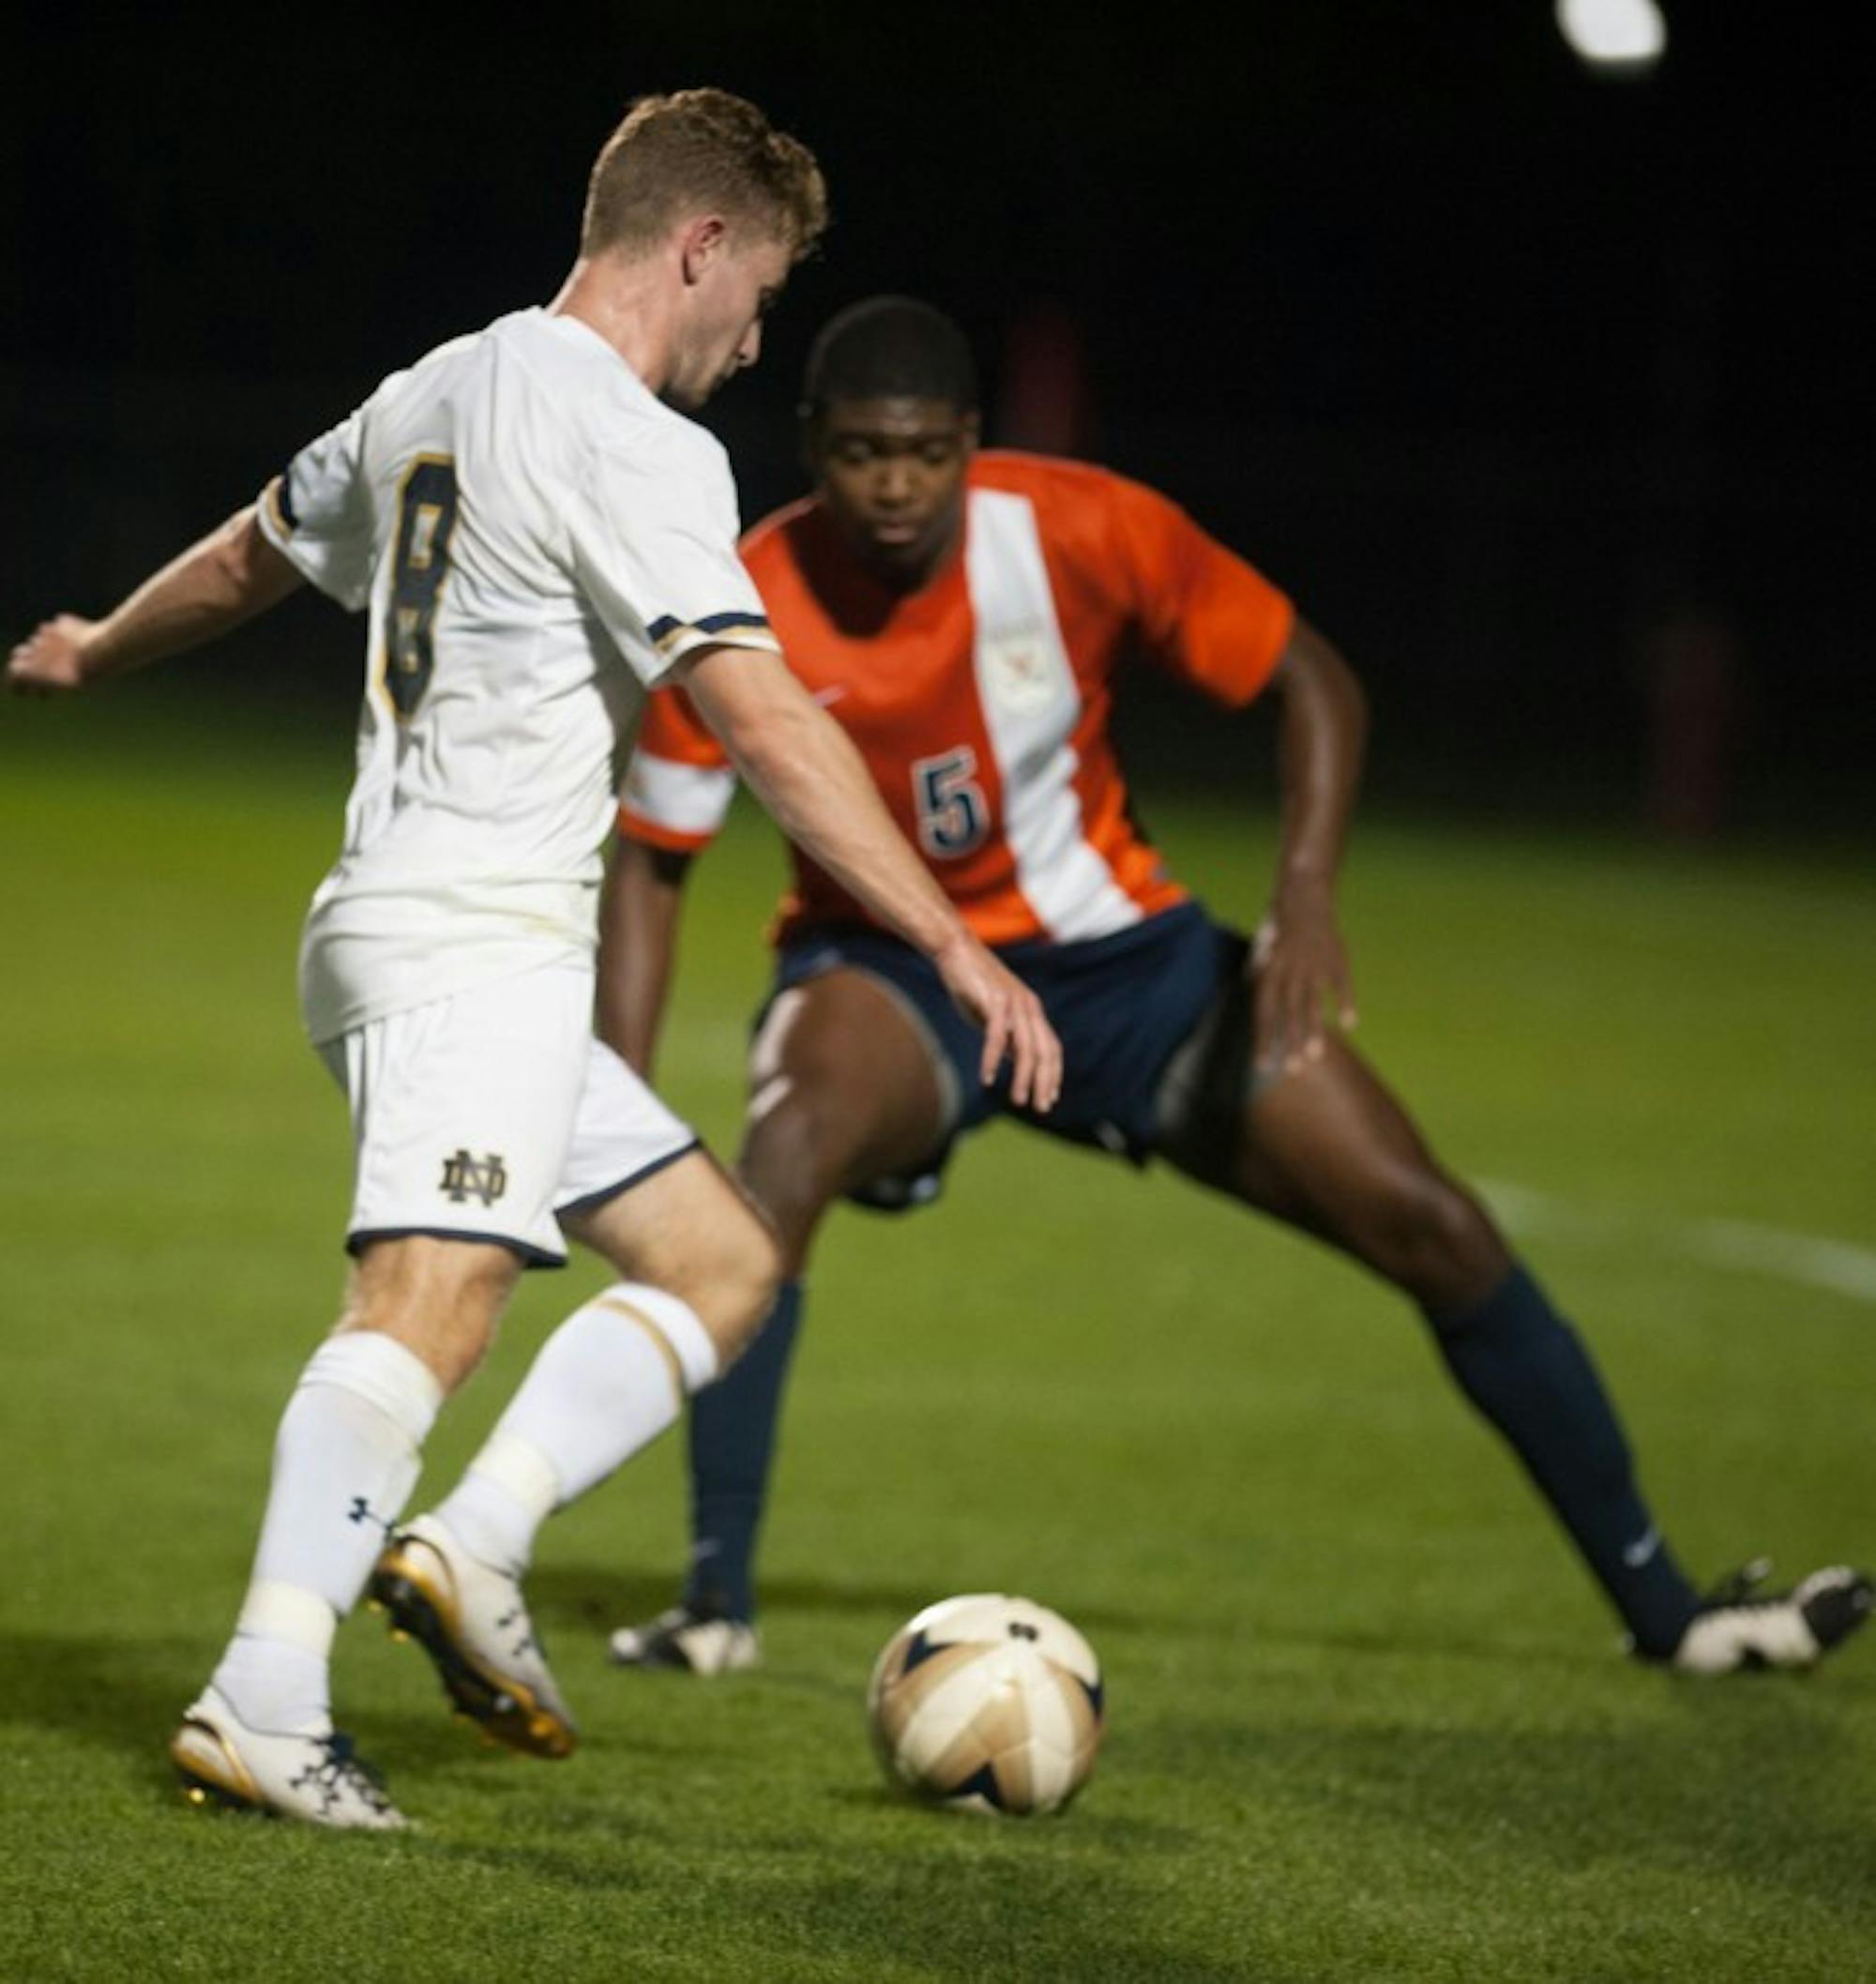 Sophomore  forward Jon Gallagher dribbles into a defender during a 3-1 victory over Virginia on Sept. 25 at Alumni Stadium.